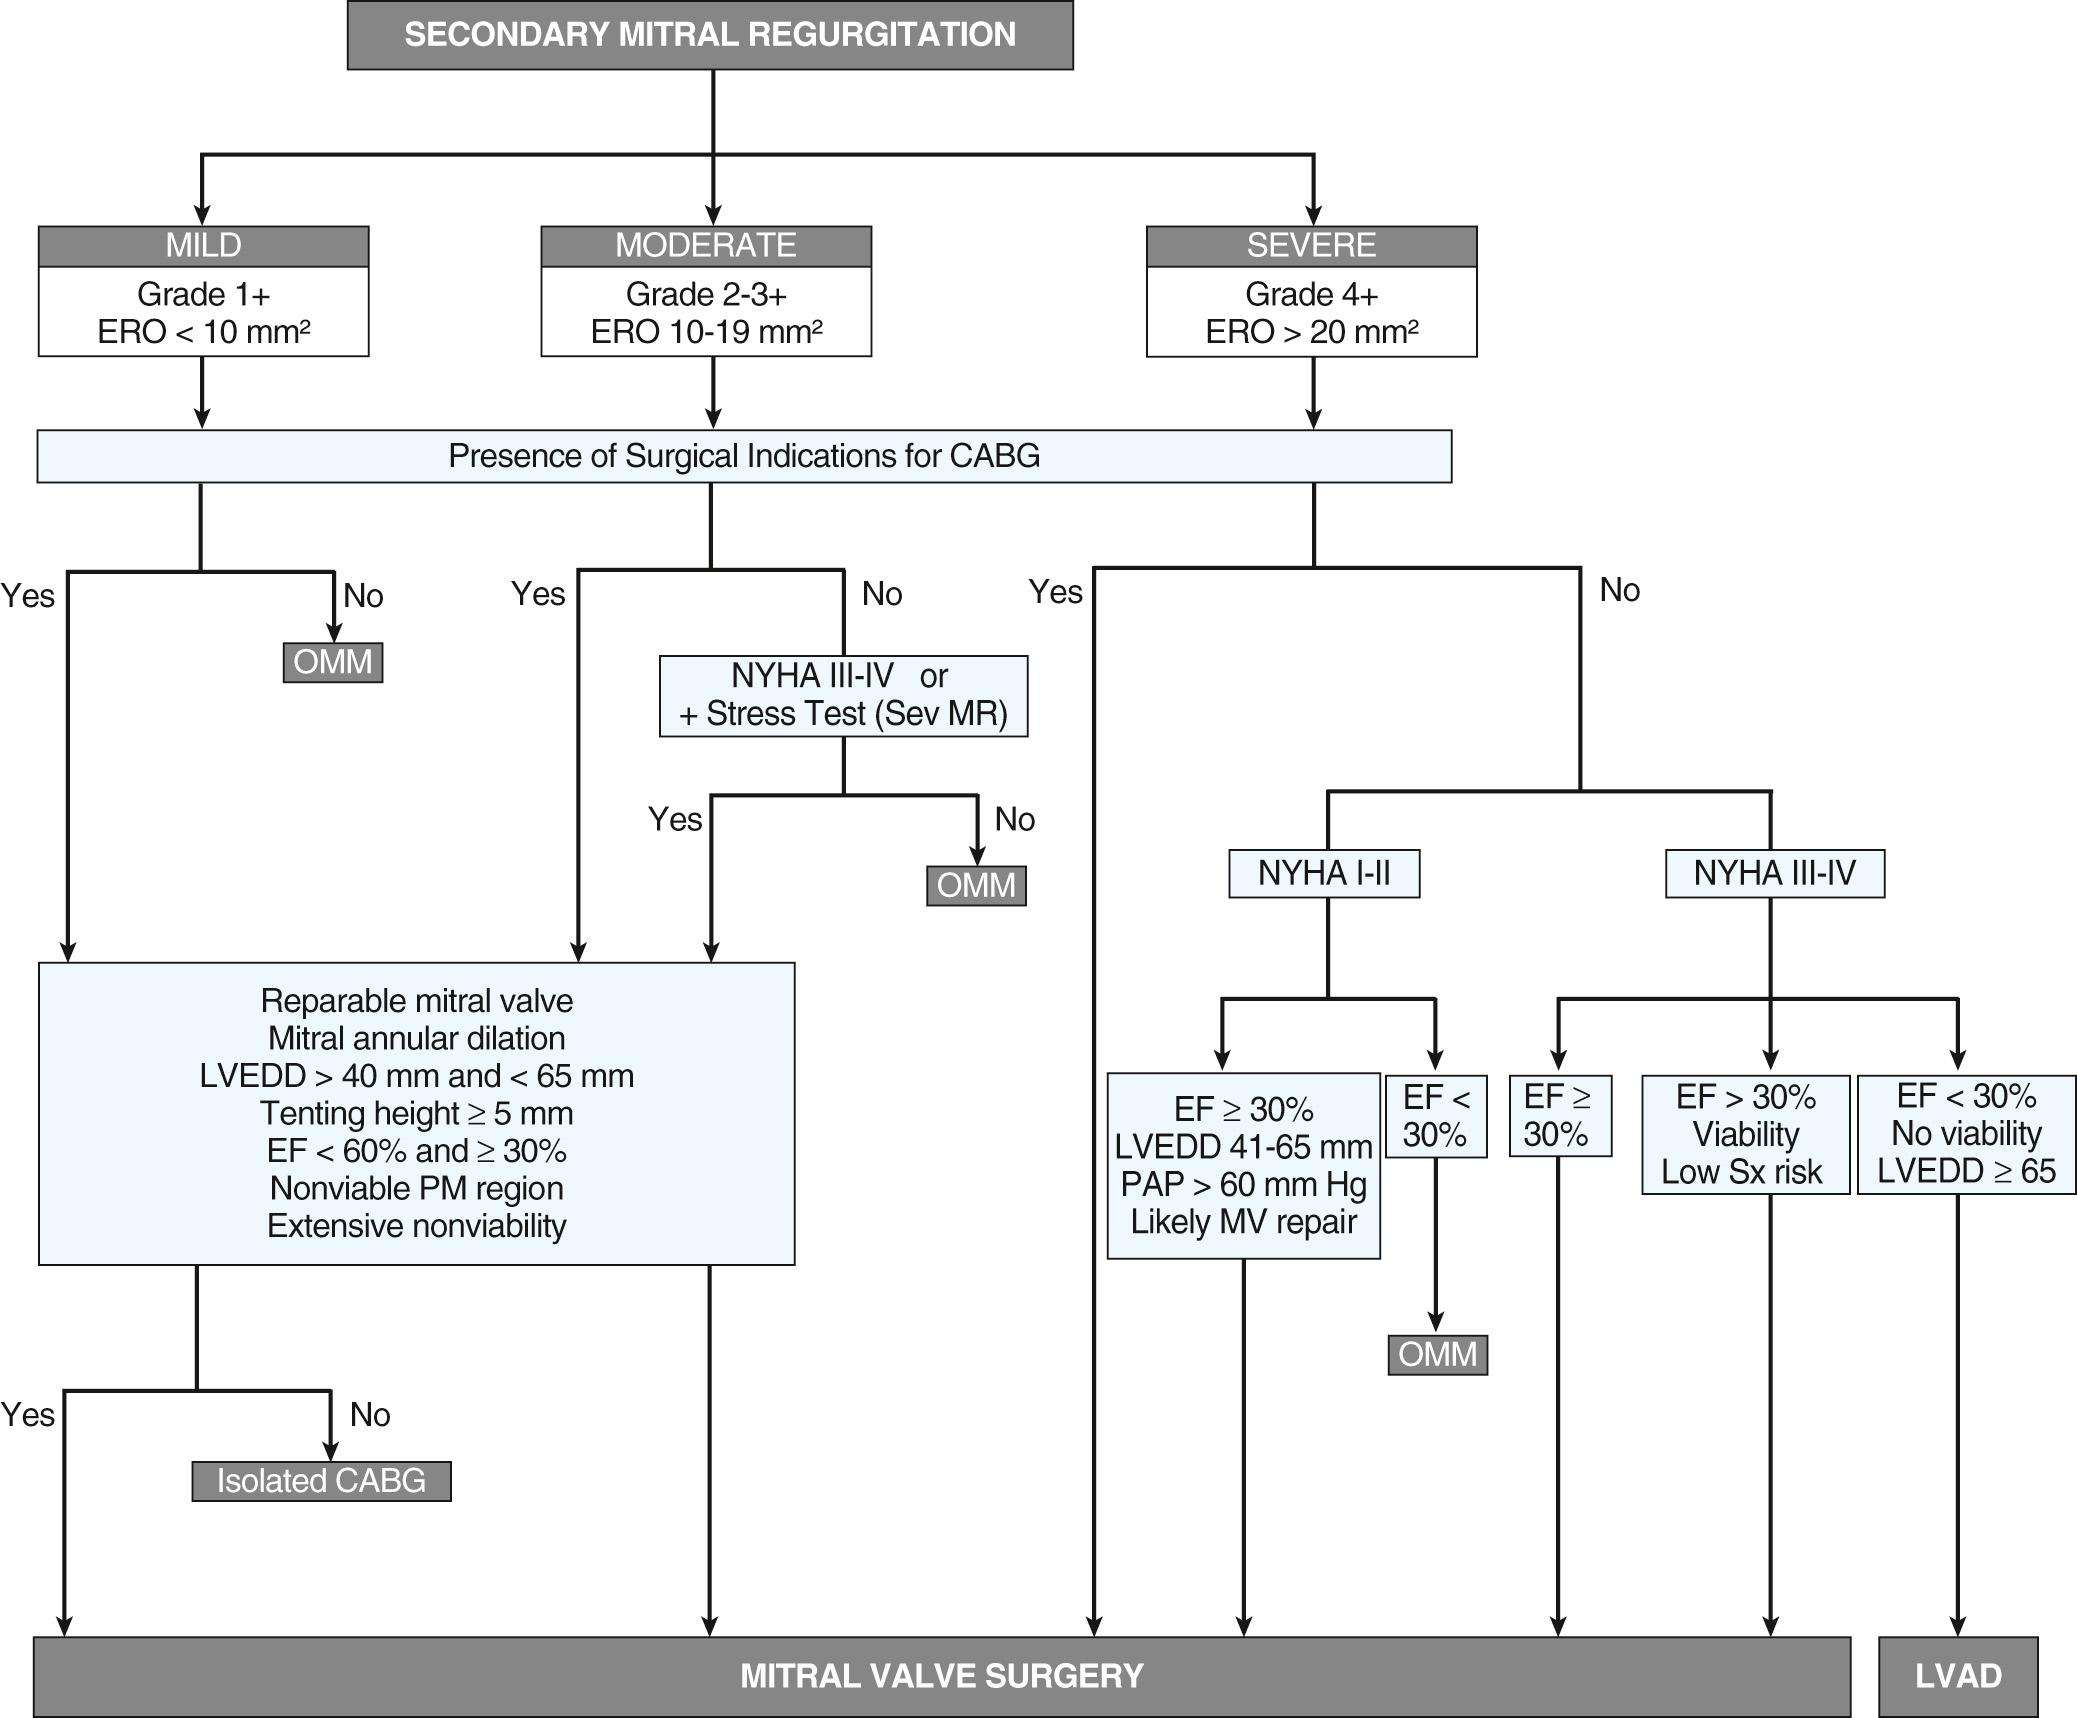 FIGURE 92-7, Decision making algorithm for surgery in patients with secondary mitral regurgitation. CABG, Coronary artery bypass grafting; EF, ejection fraction; ERO, effective regurgitant orifice; LVAD, left ventricular assist device; LVEDD, left ventricular end-diastolic diameter; MR, mitral regurgitation; NYHA, New York Heart Association functional class; OMM, optimal medical management including cardiac resynchronization therapy; PAP, pulmonary artery pressure; PM, papillary muscle; Sx, surgical.